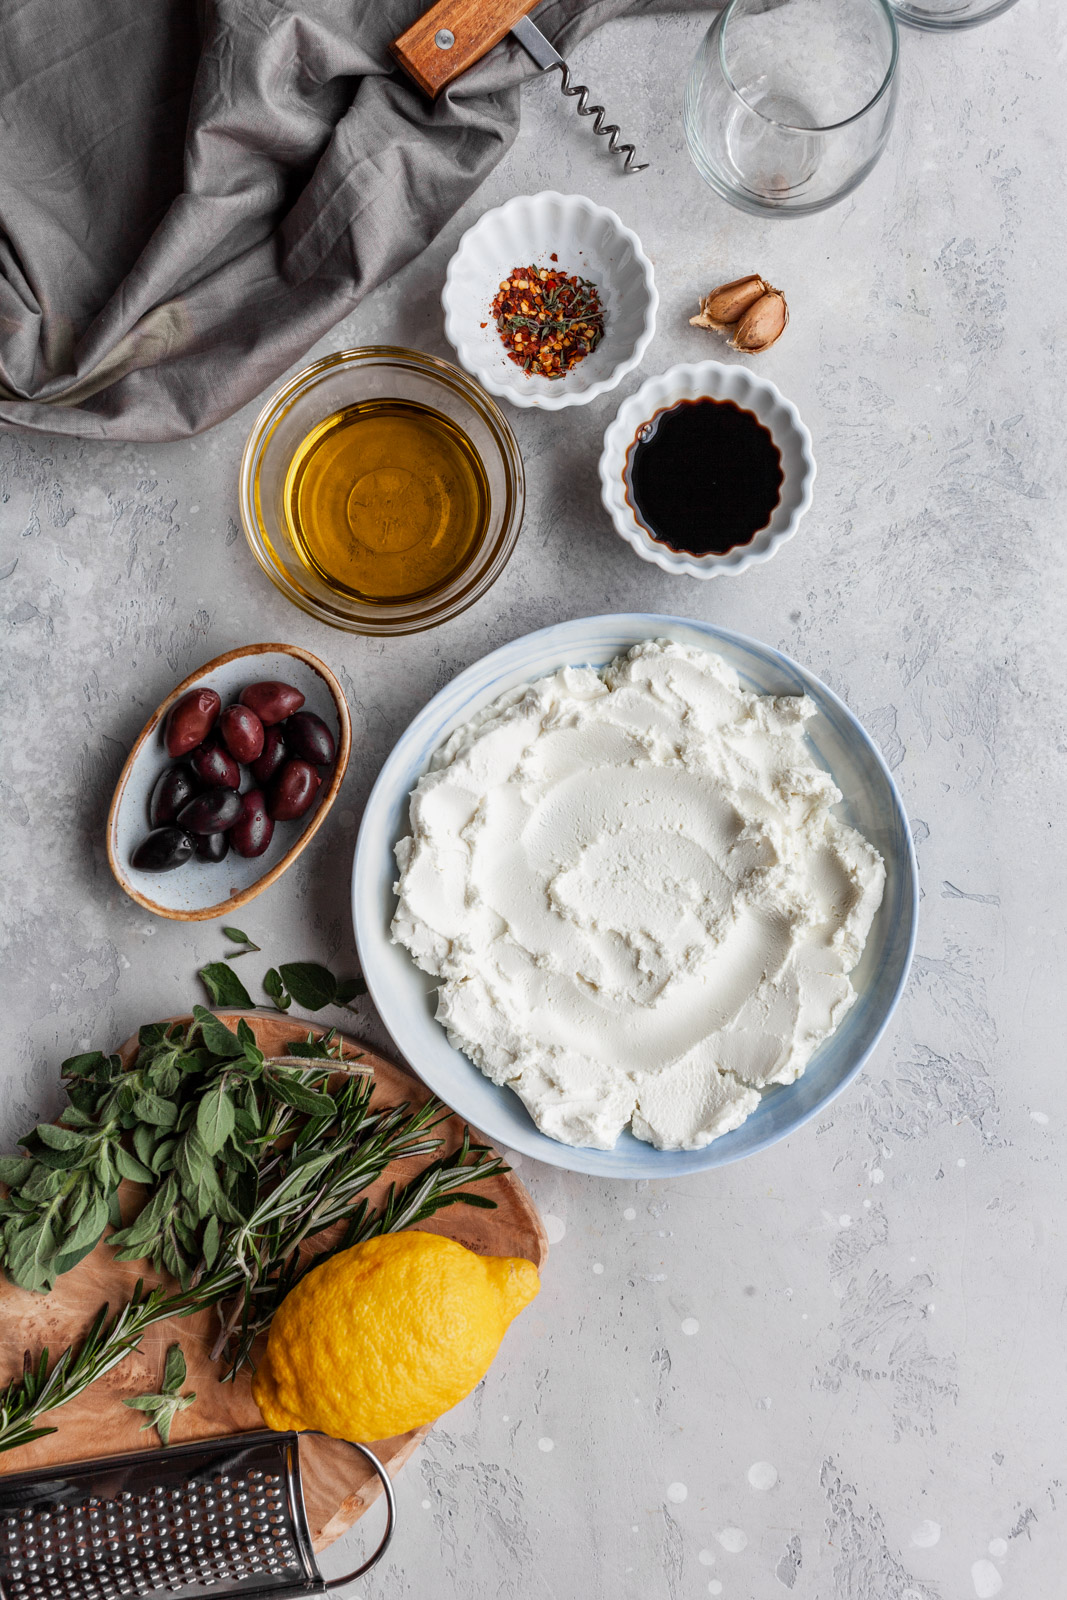 Marinated Goat Cheese Spread